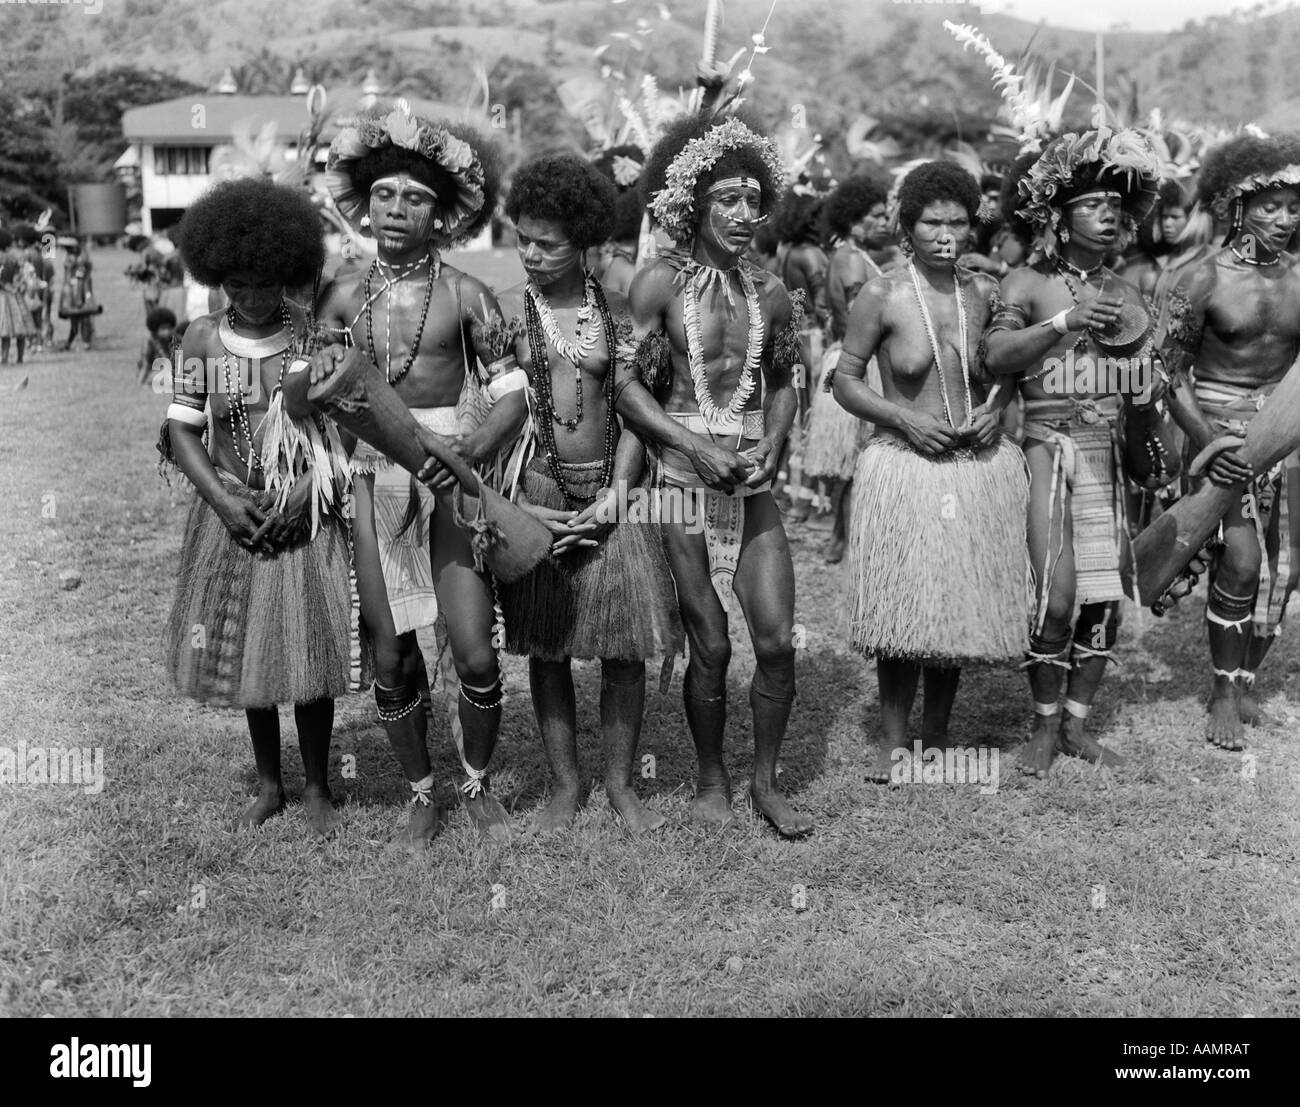 1920s 1930s GROUP OF NATIVE PAPUAN DANCERS IN COSTUME GRASS SKIRT MUSIC FOLK DANCE PORT MORESBY NEW GUINEA Stock Photo